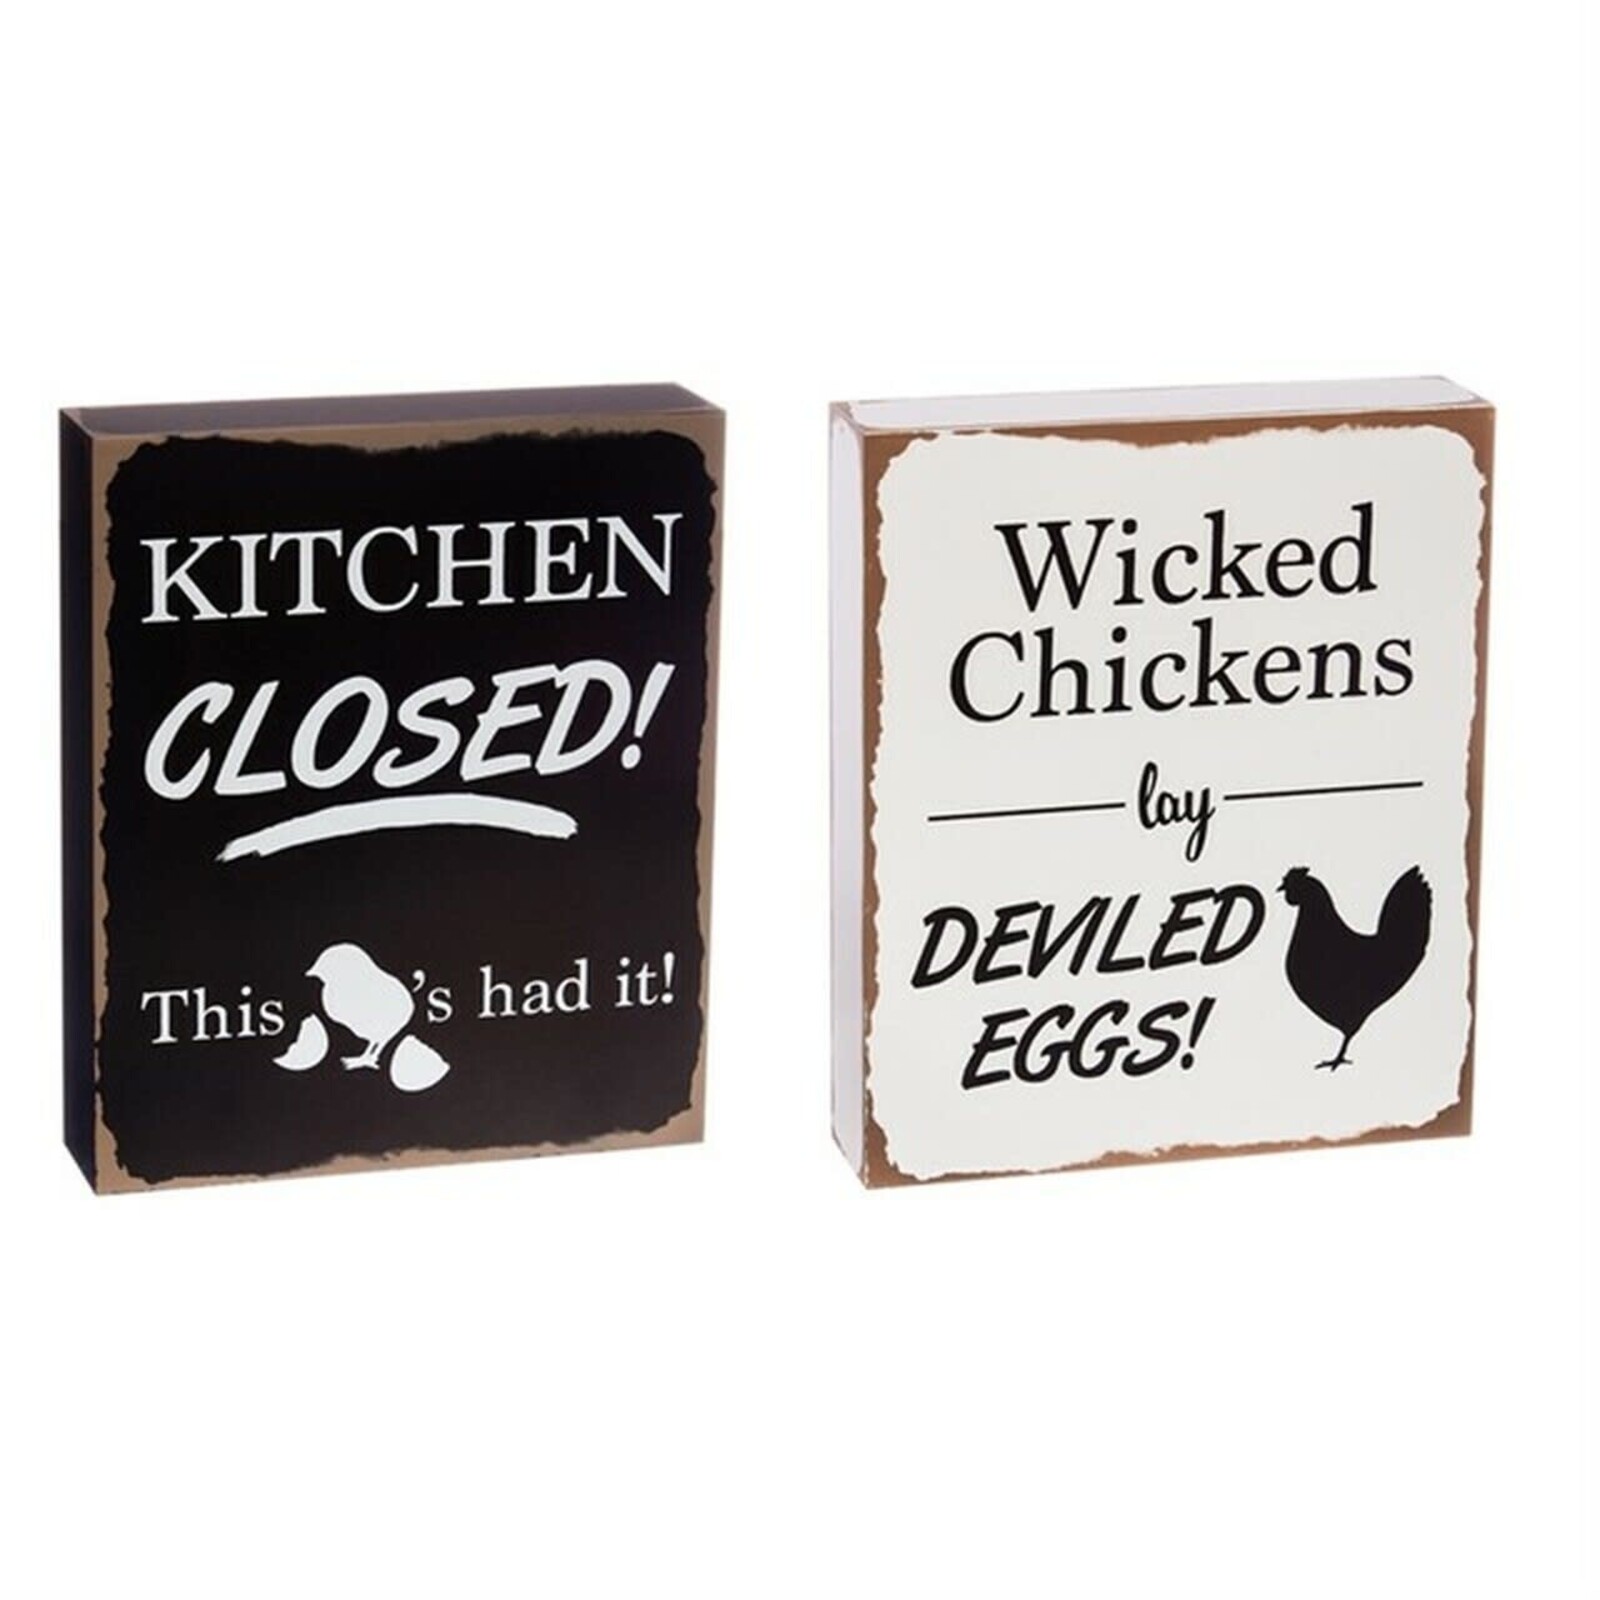 Evergreen Enterprises Wooden Block Wicked Chickens 3WP167 loading=